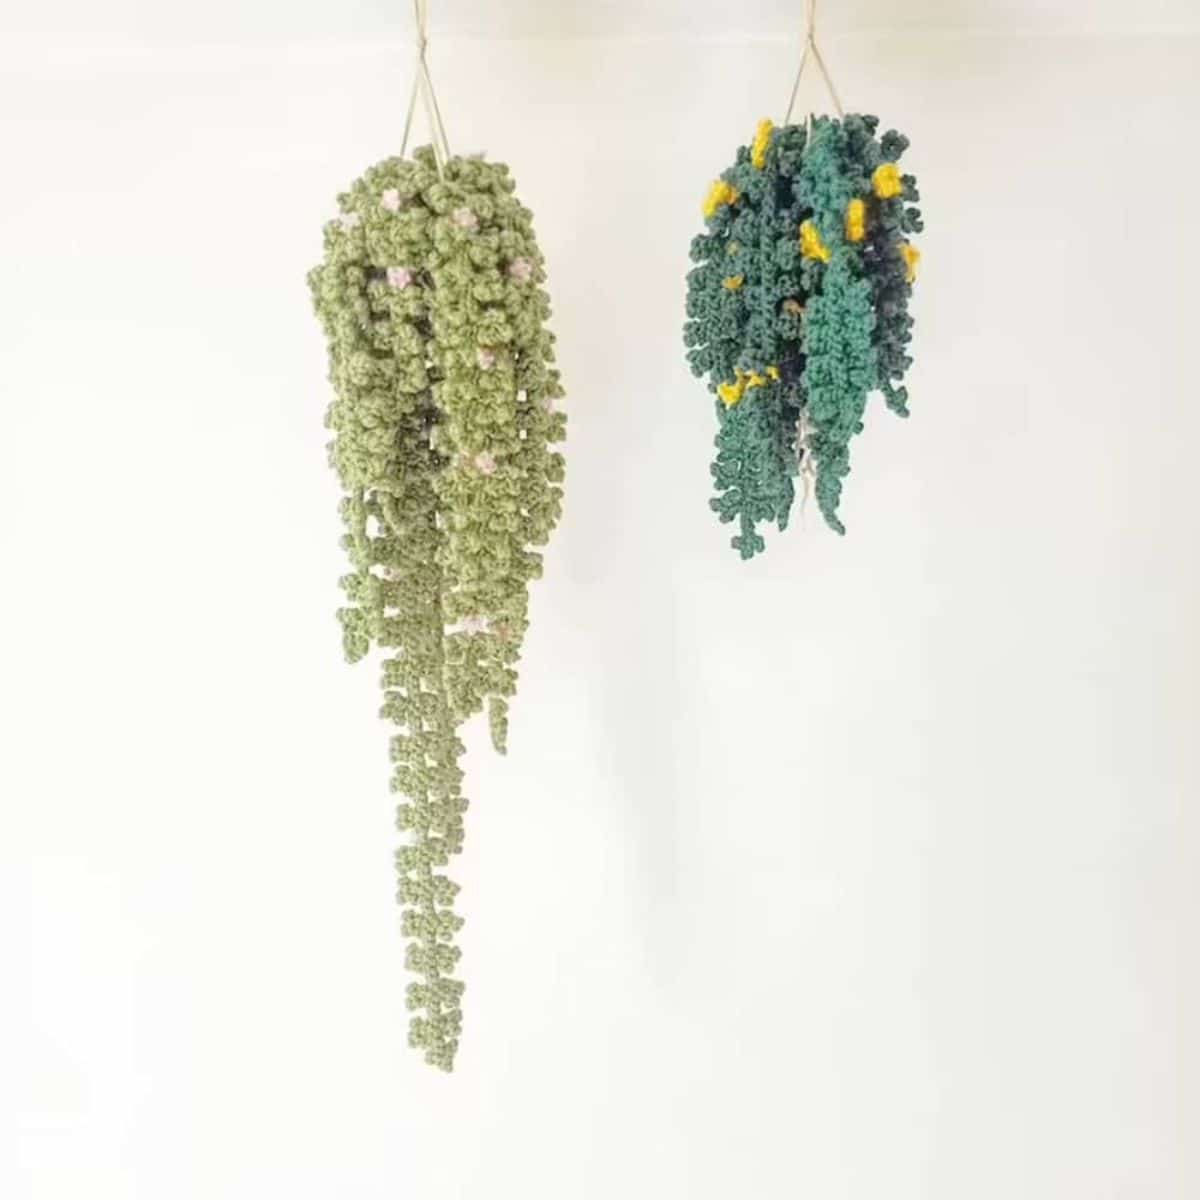 Two hanging vines of crochet foliage, one with pale green leaves and the other with dark green and yellow on a white background.